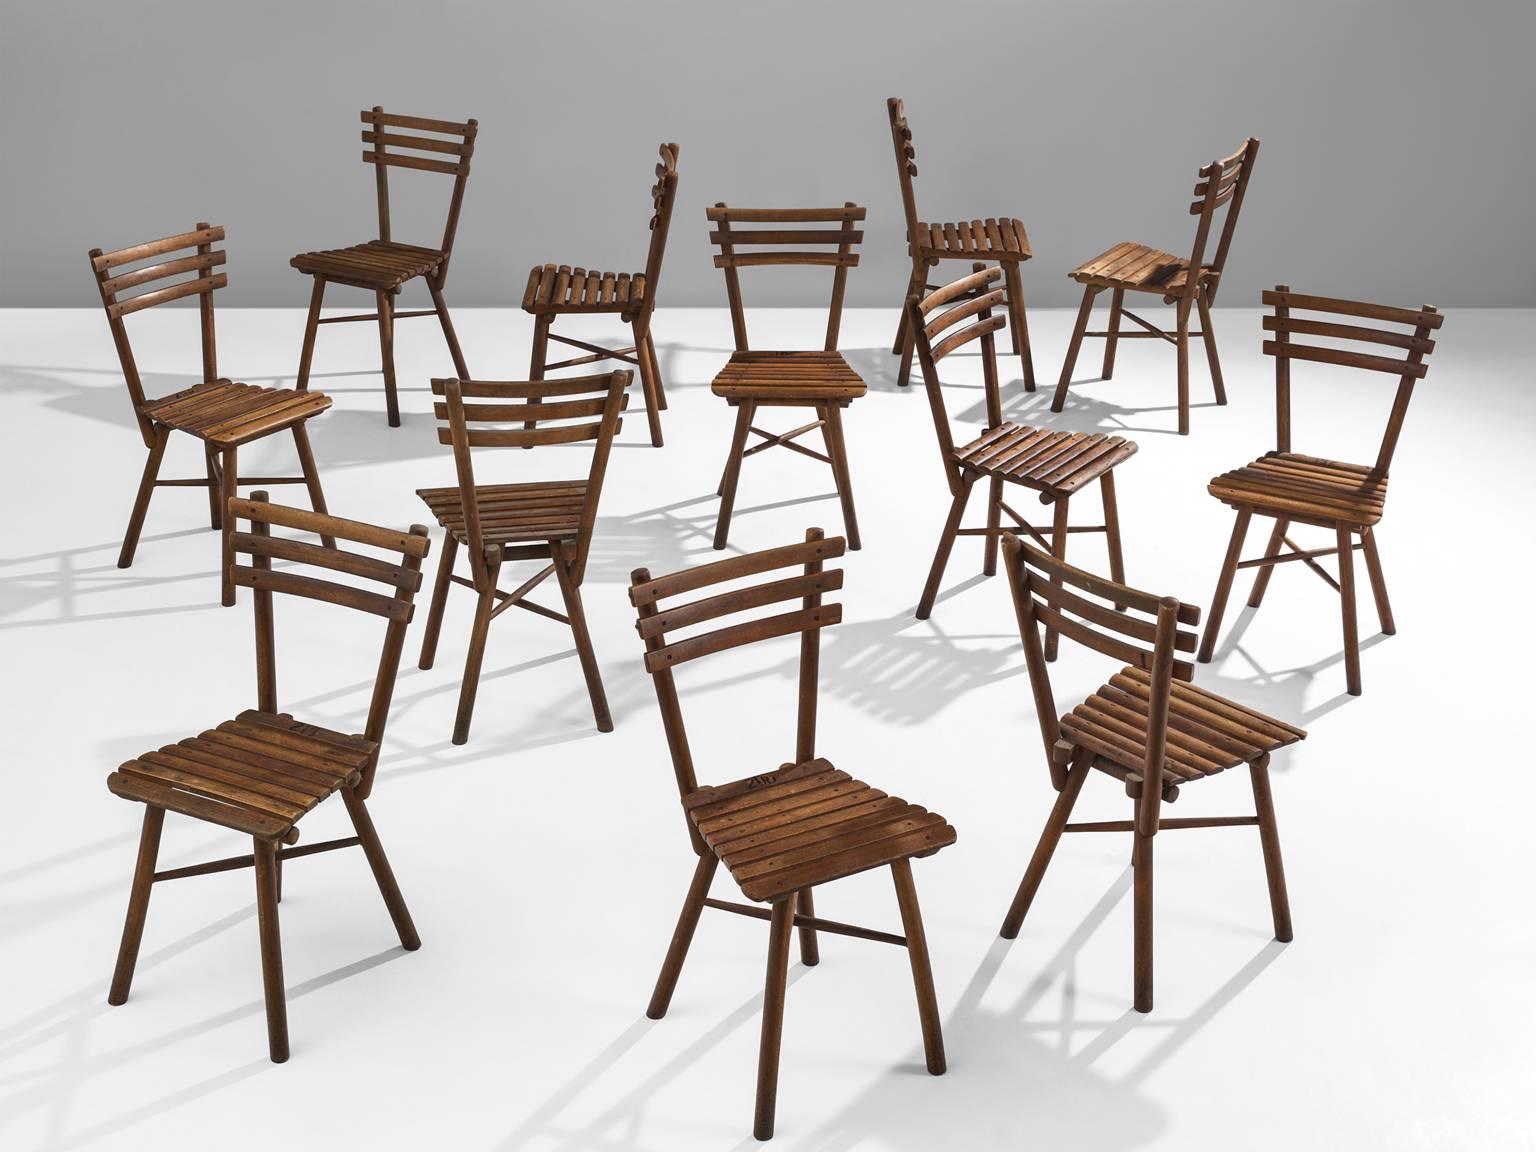 Set of twelve Thonet garden chairs in beech by, J. &;J. Kohn 'Nr. 4', circa 1910.

This large set of Thonet chairs are executed by J.&J. Kohn. These chairs have slats as their main feature and their legs are connected with a crossed base. Michael